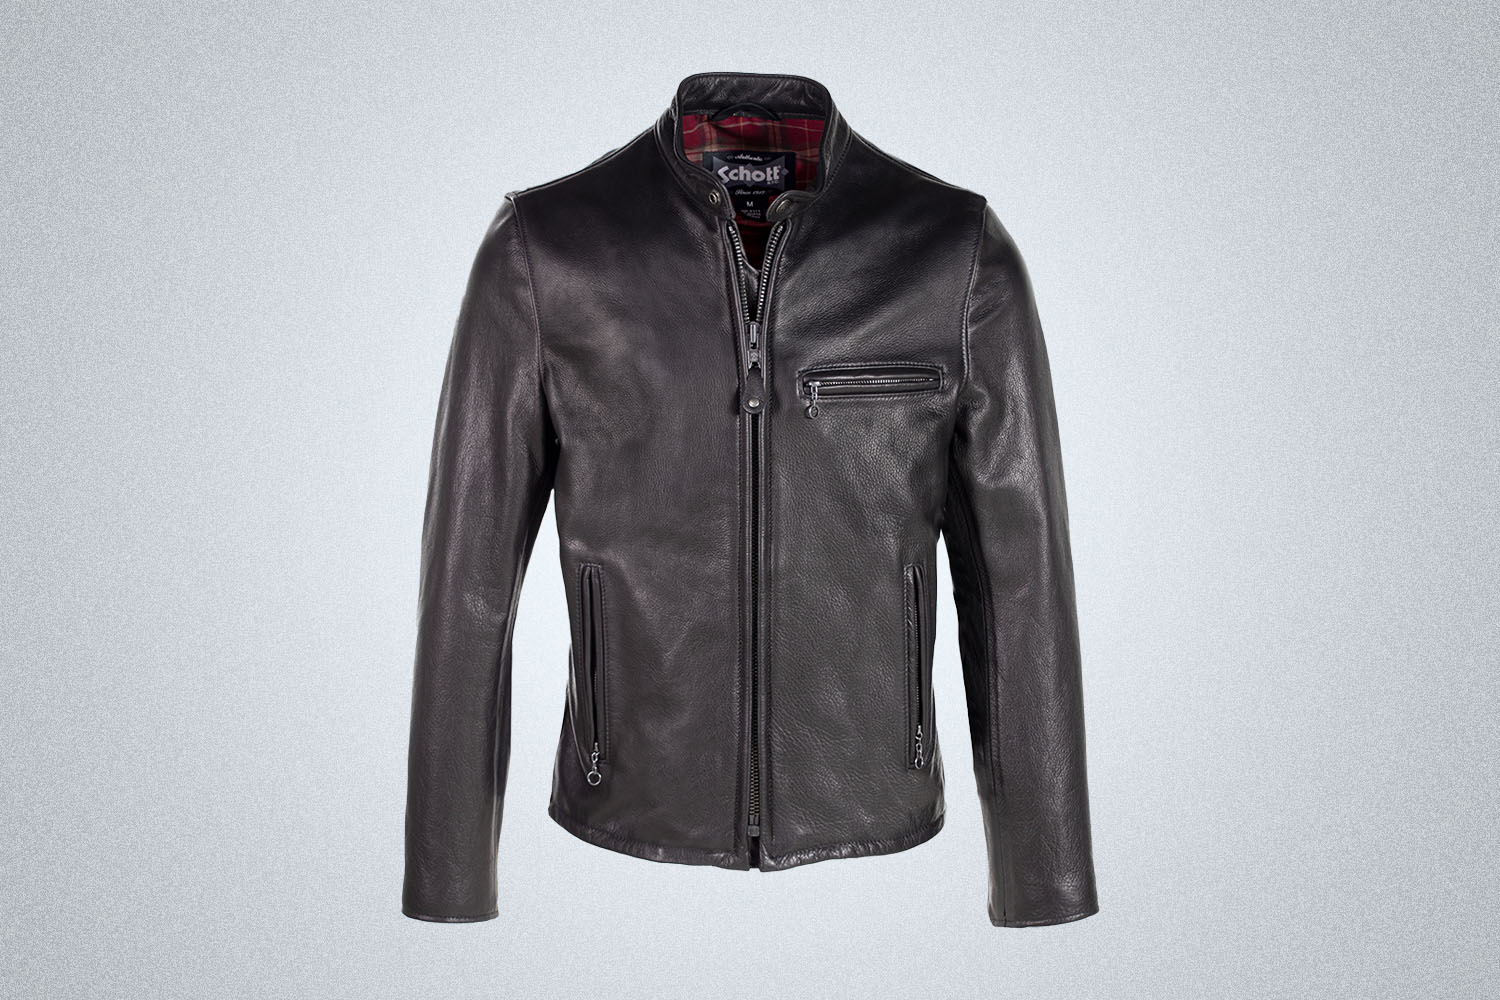 The Schott Waxed Natural Pebbled Cowhide Cafe Leather Jacket on gray background